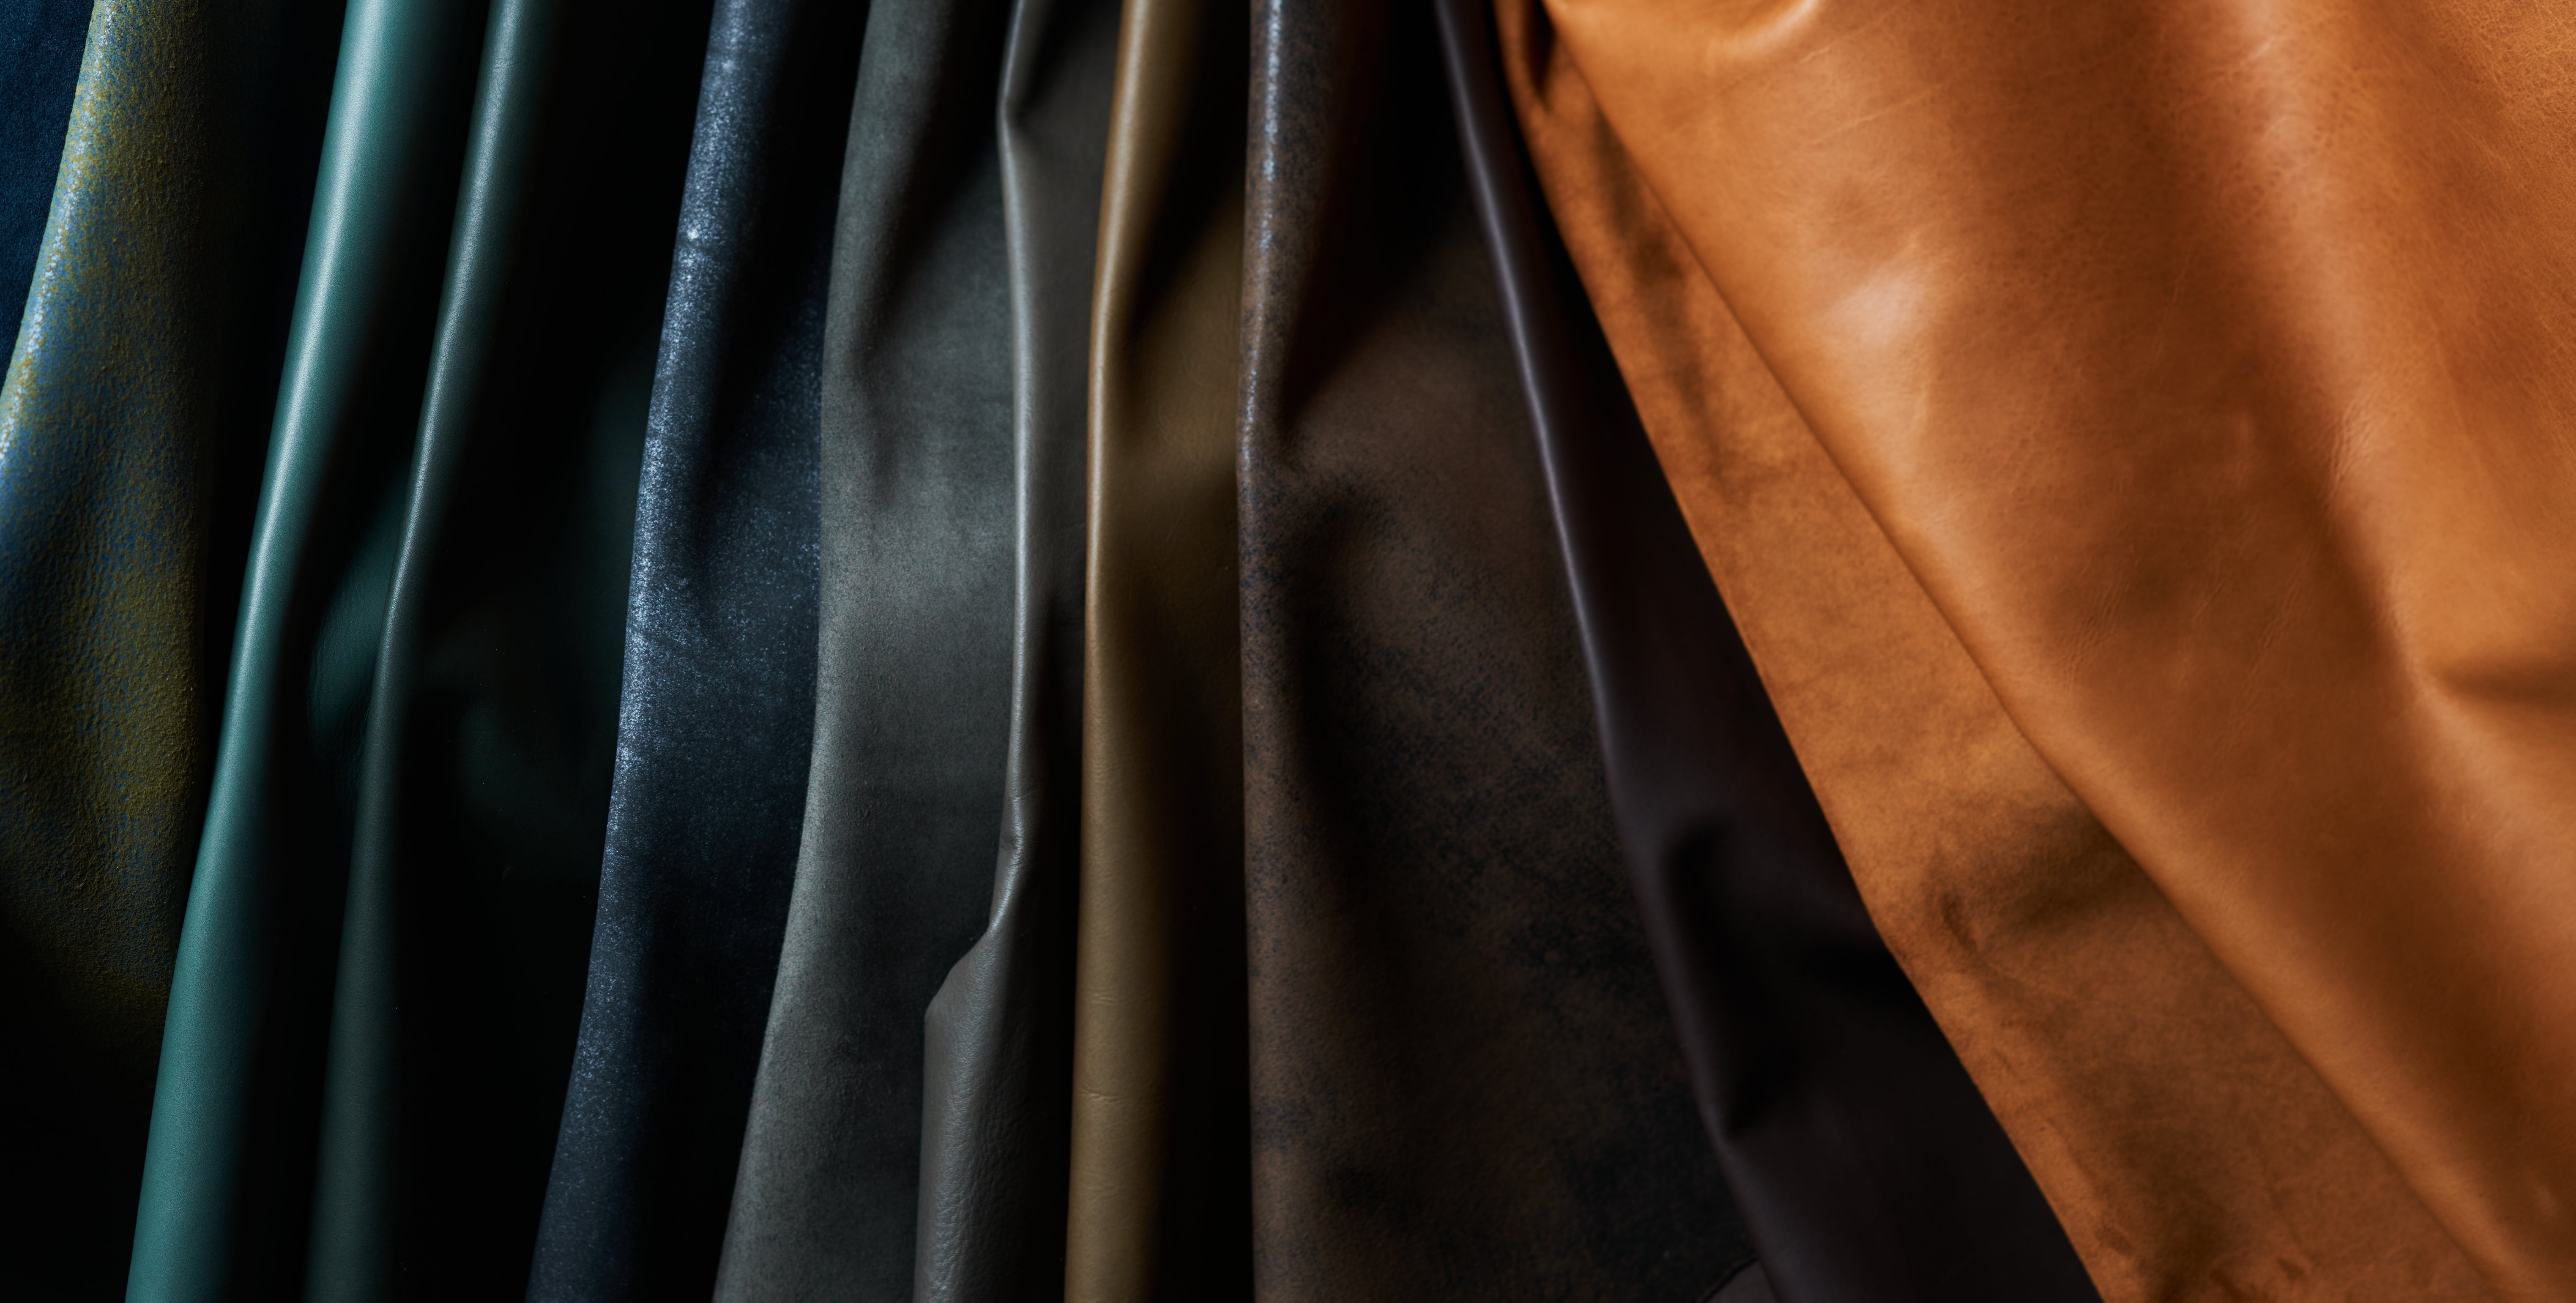 Image of Vari-colored leathers folded on top of each other.